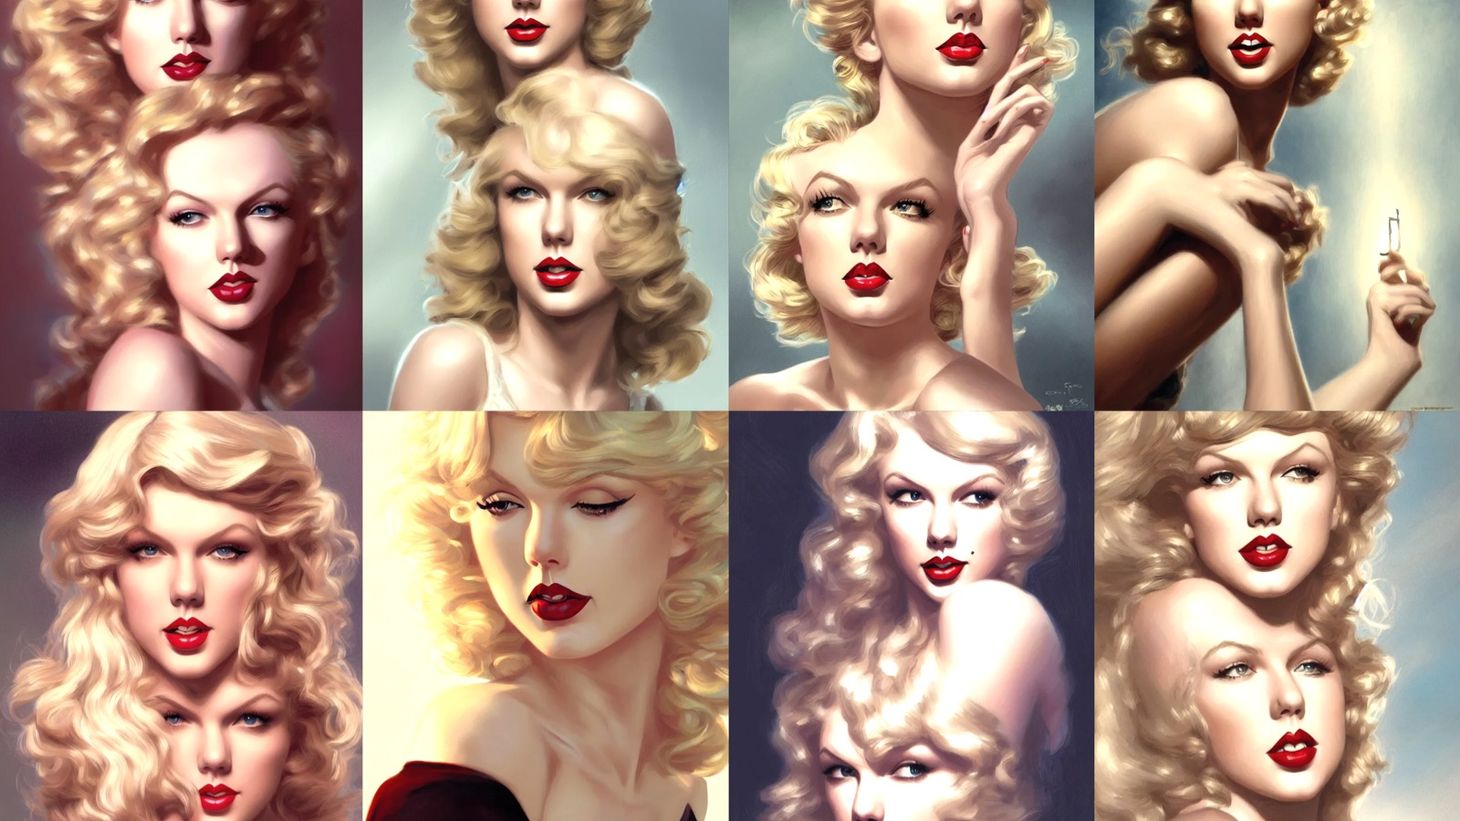 How to Create More Taylor Swifts?